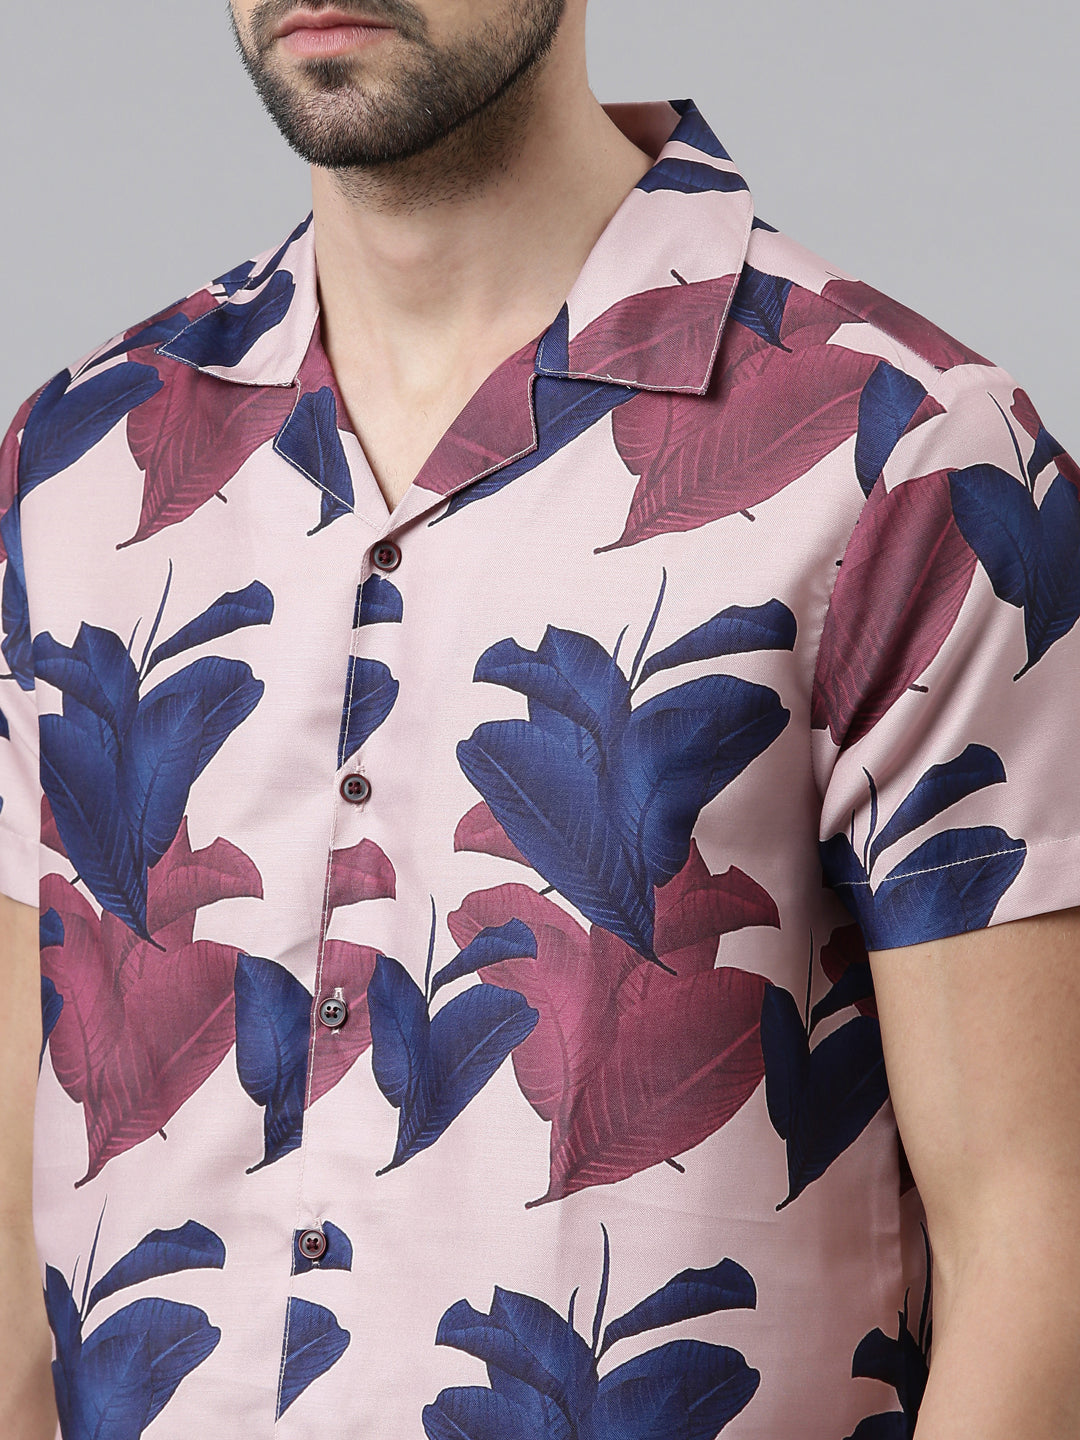 Onion Pink Printed Co-Ords Co-Ords Bushirt   